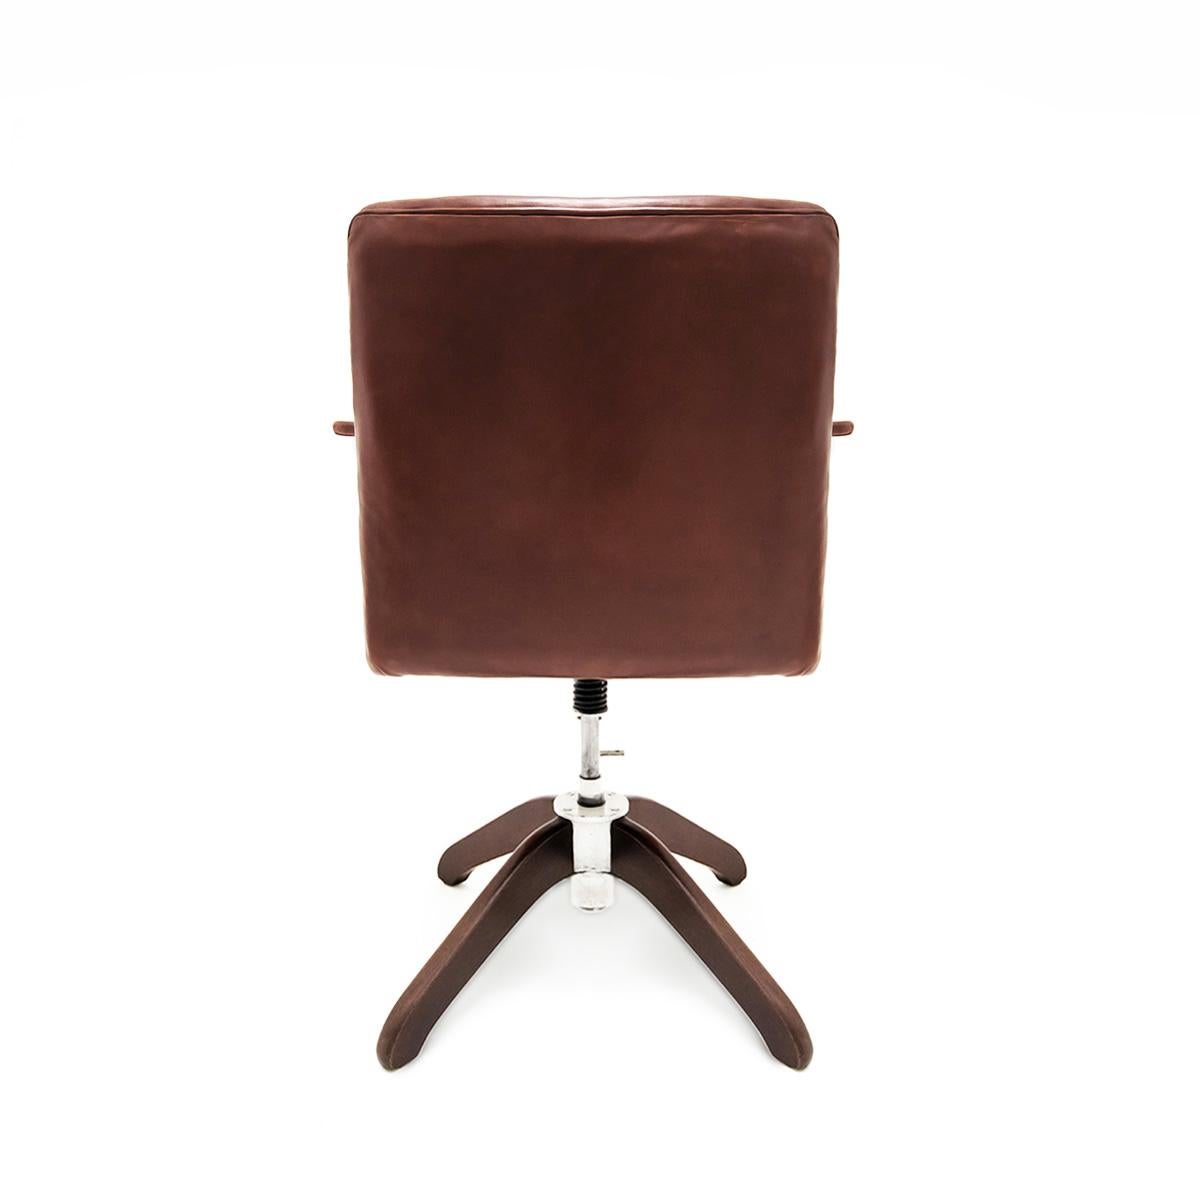 Mid-20th Century Hans J. Wegner Danish 1940s Leather and Oak Model A721 Executive Chair For Sale